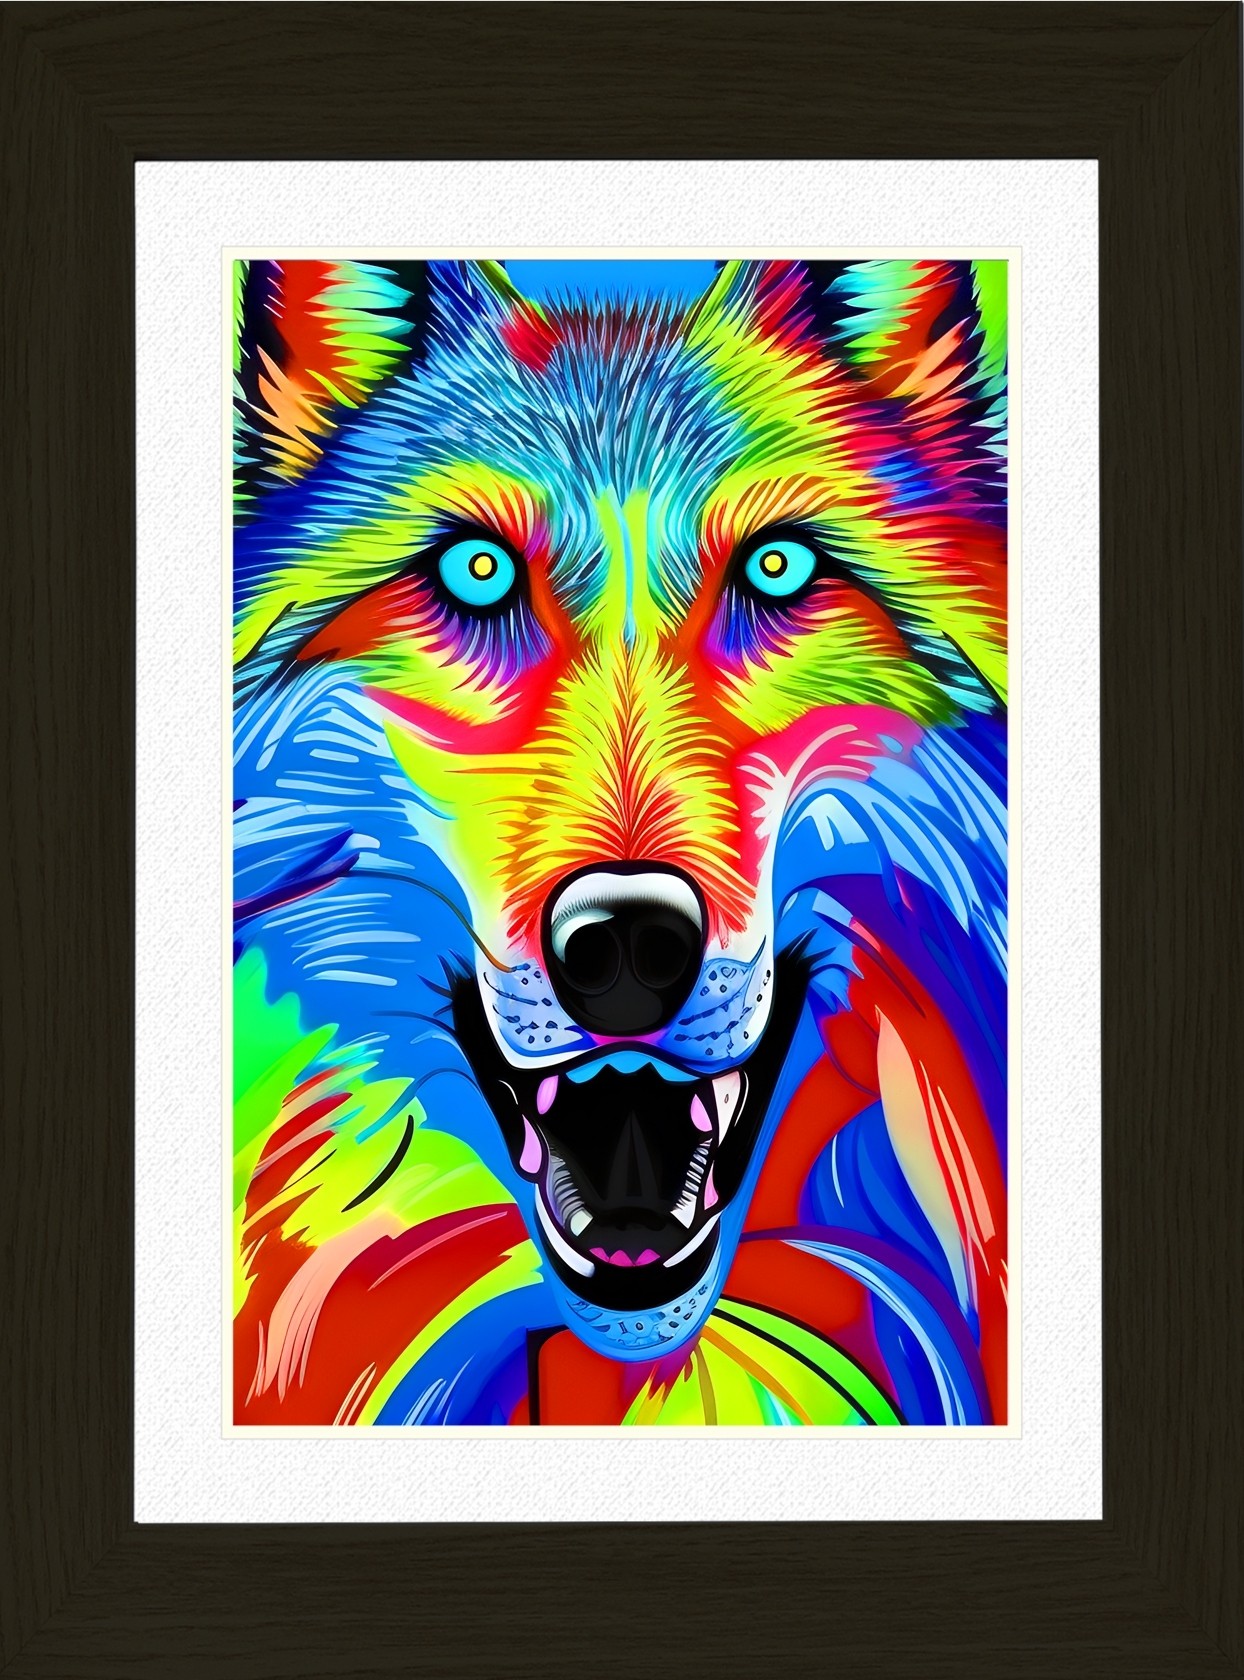 Wolf Animal Picture Framed Colourful Abstract Art (A3 Black Frame)